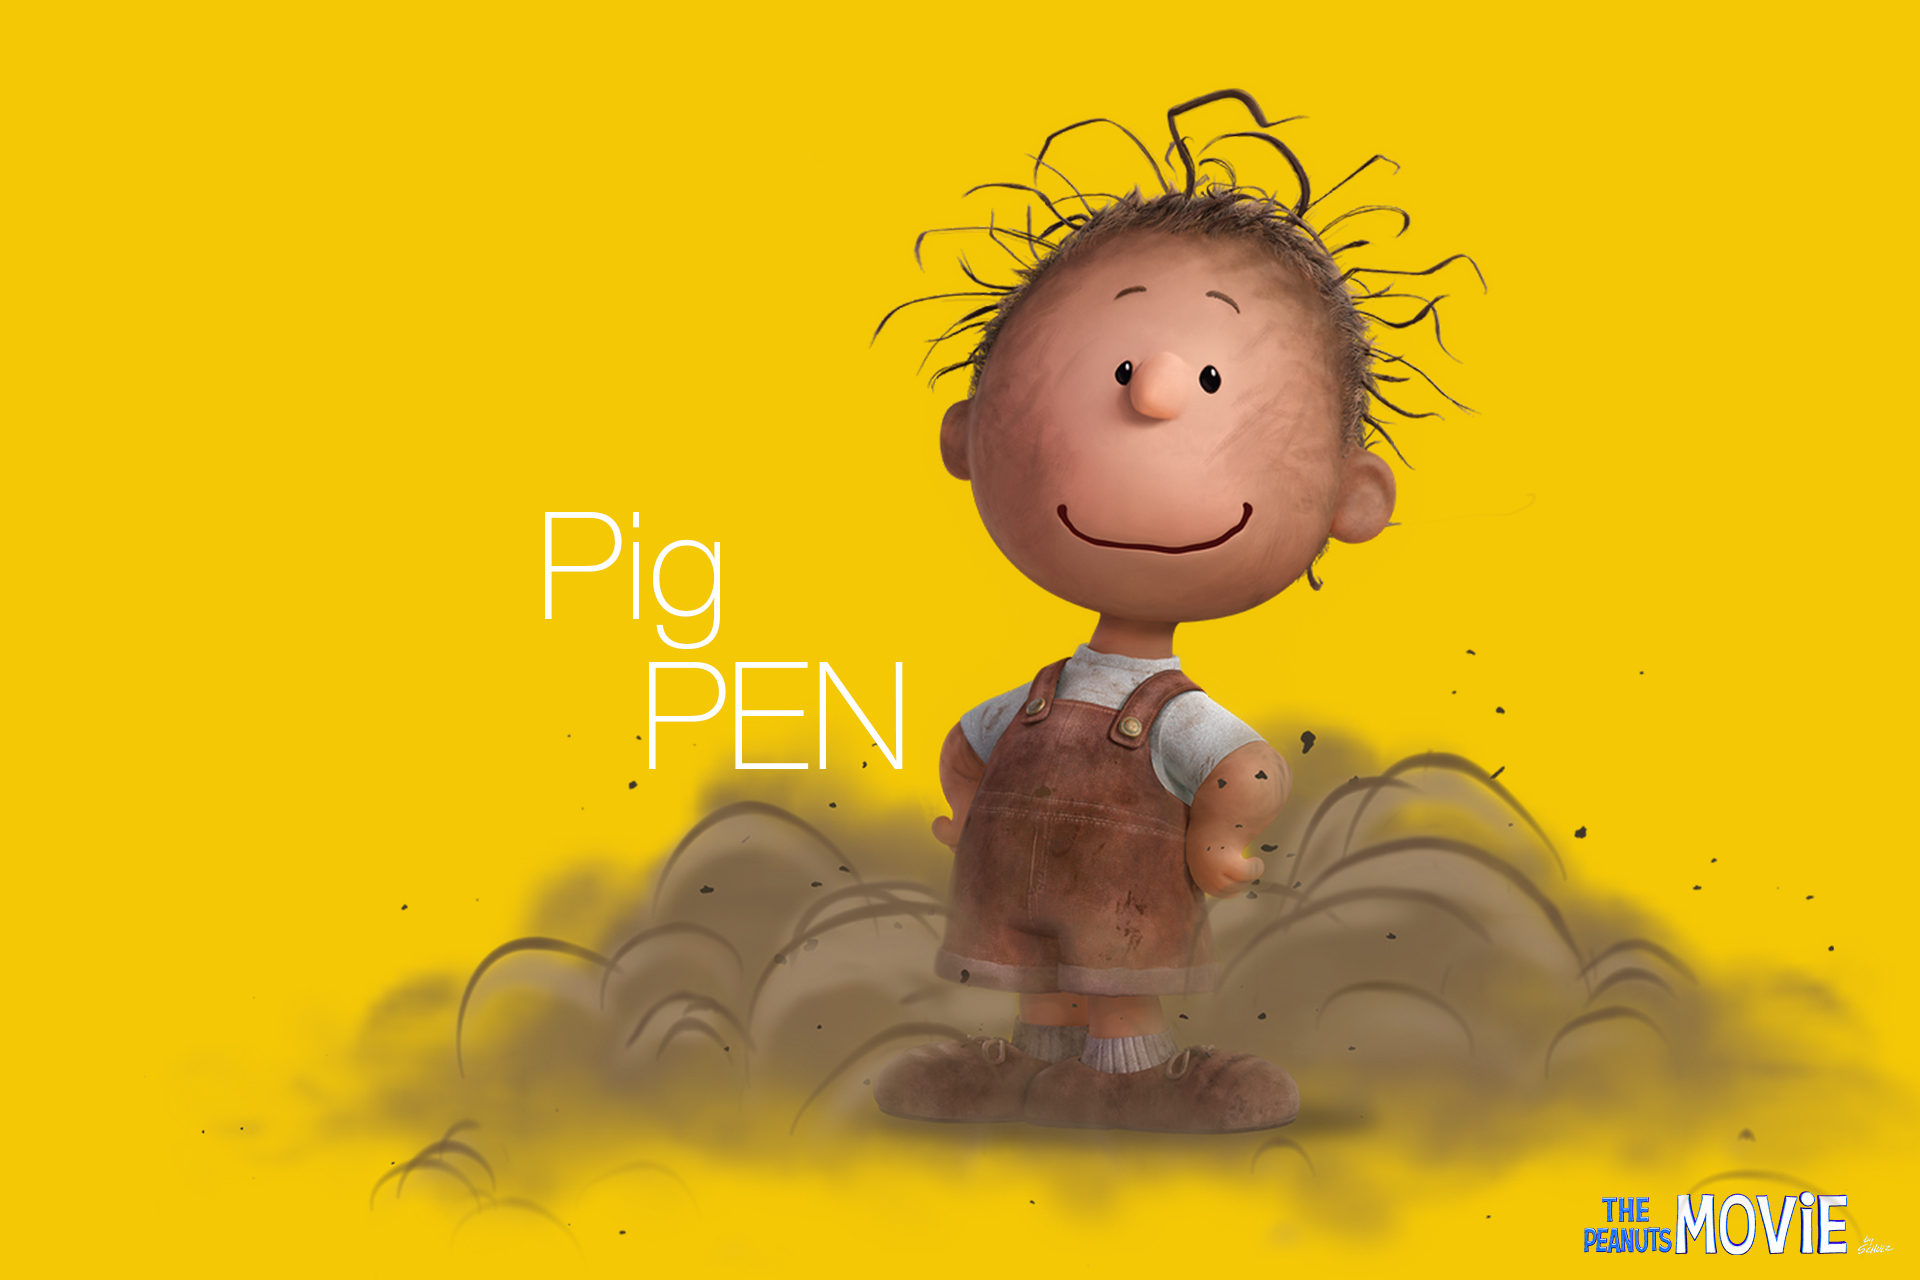 Snoopy And Charlie Brown Pig Pen